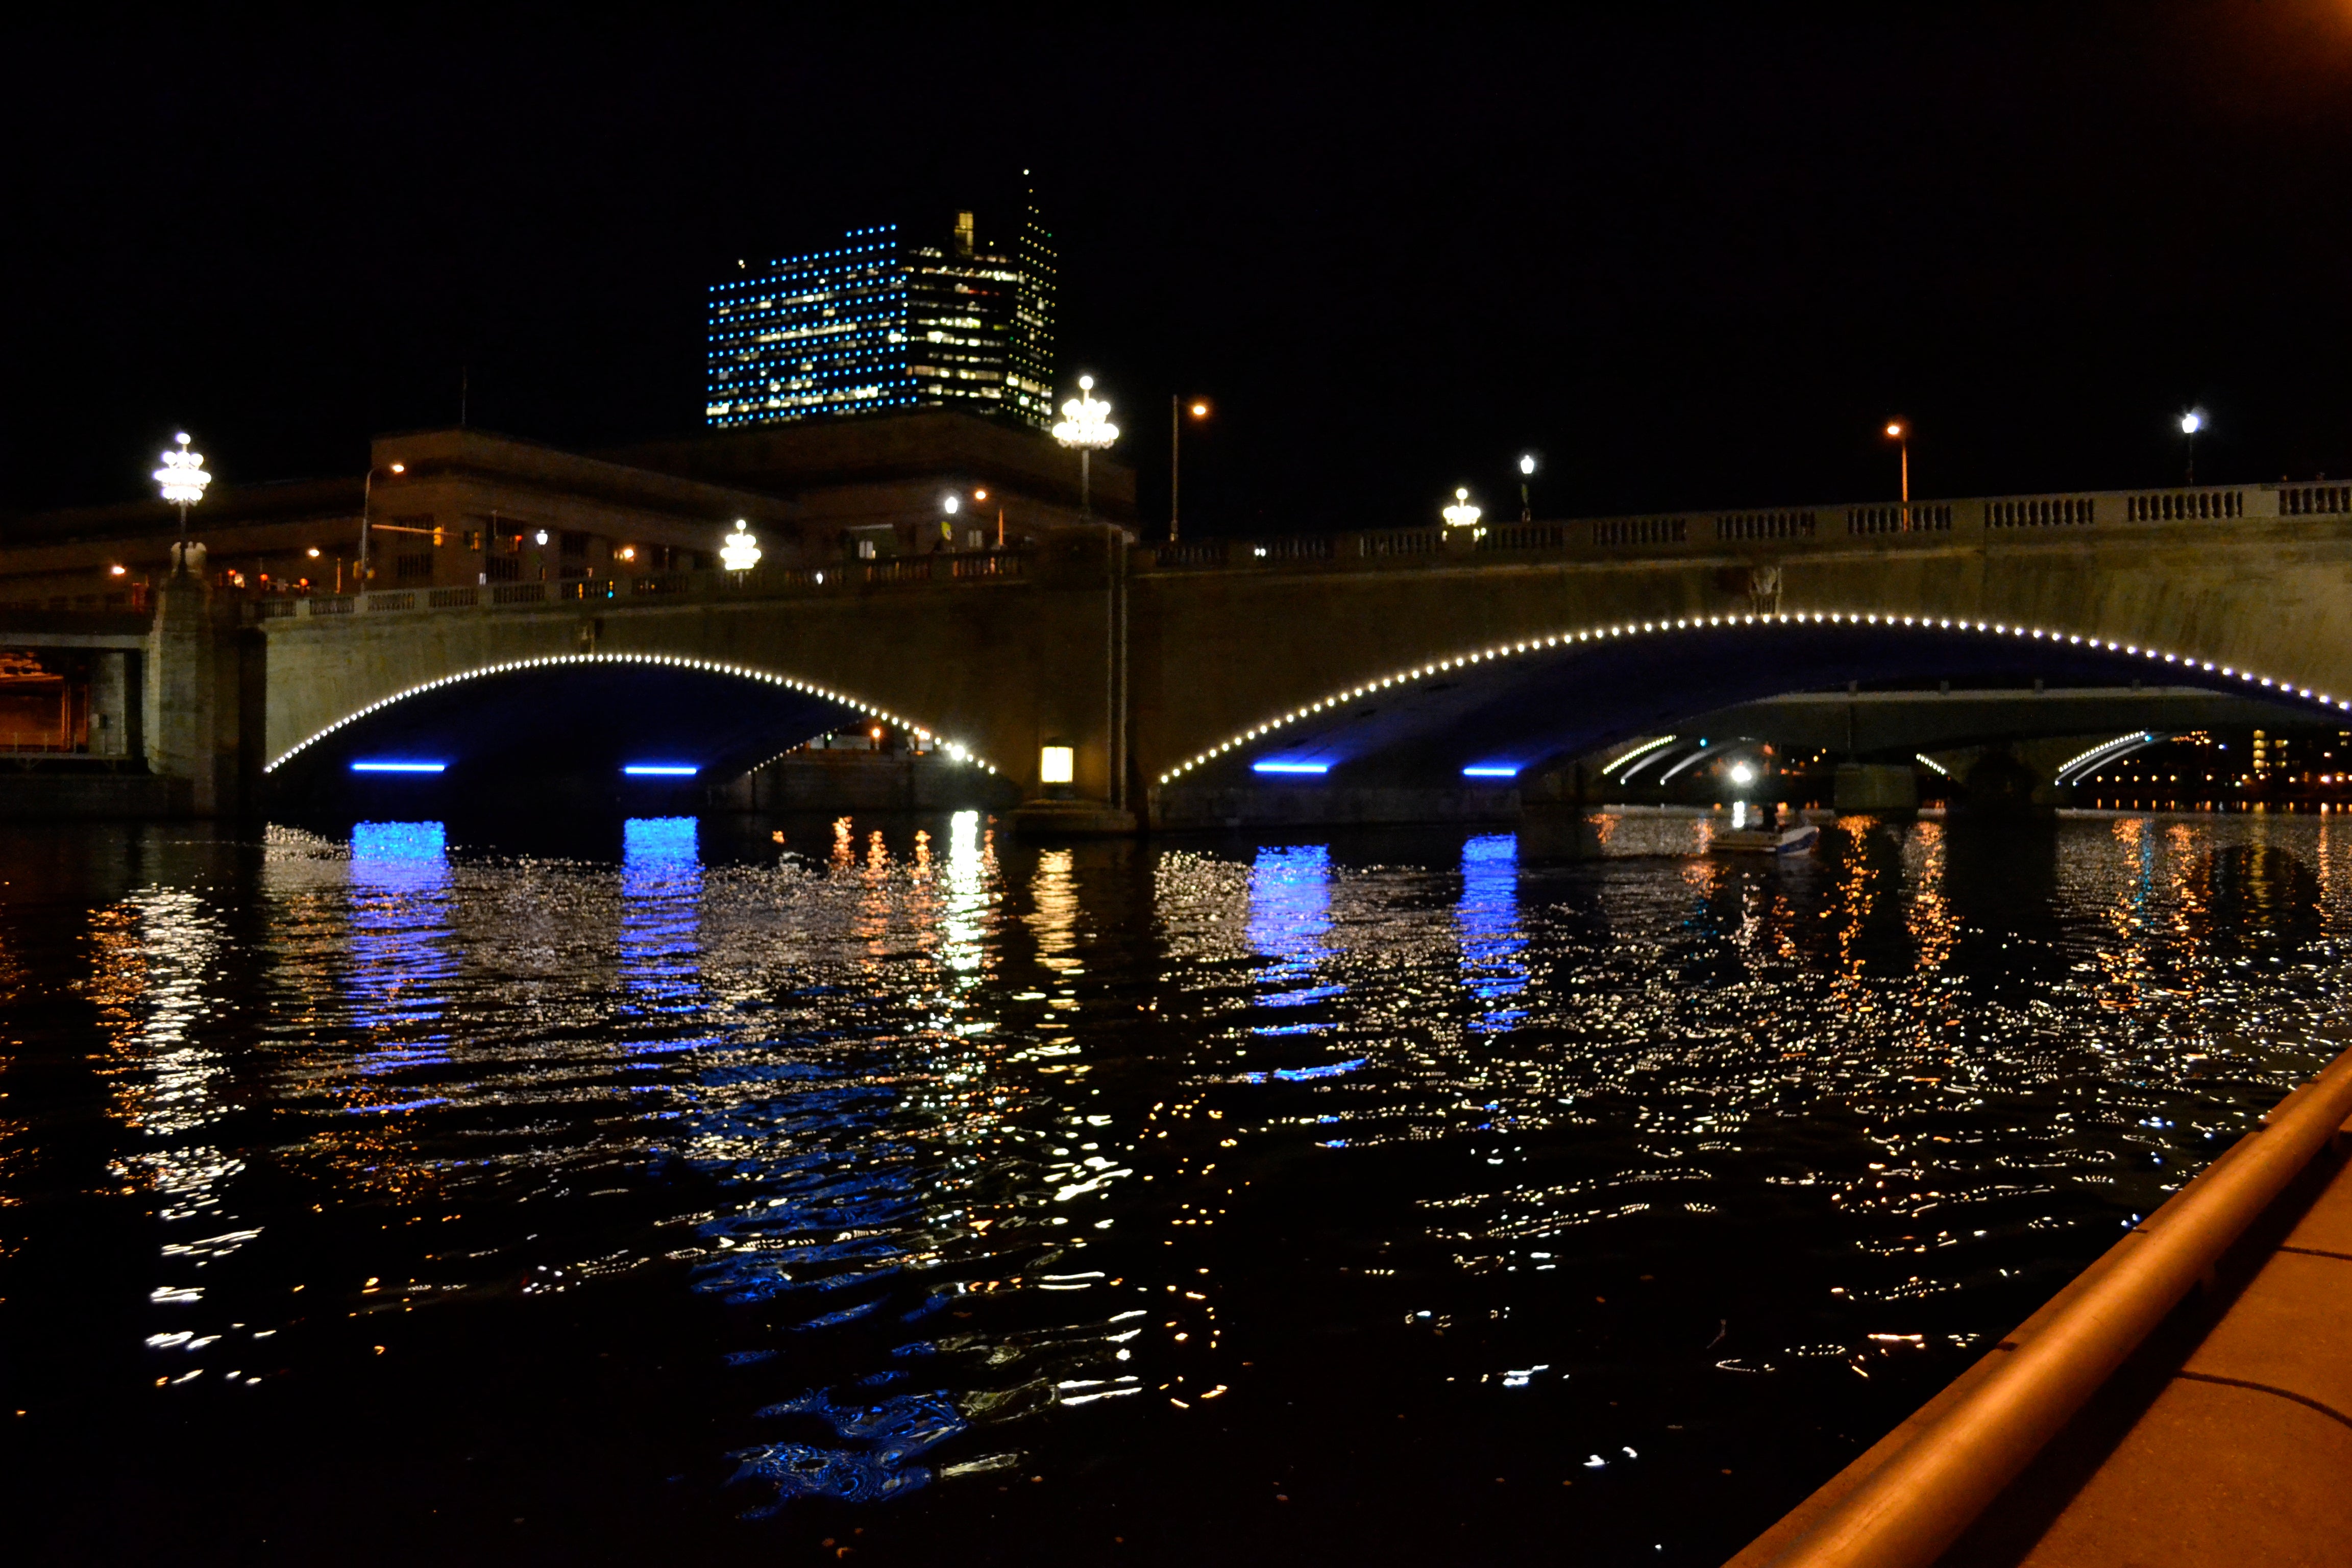 The new lights were part of the Schuylkill Banks Bridge Lighting project